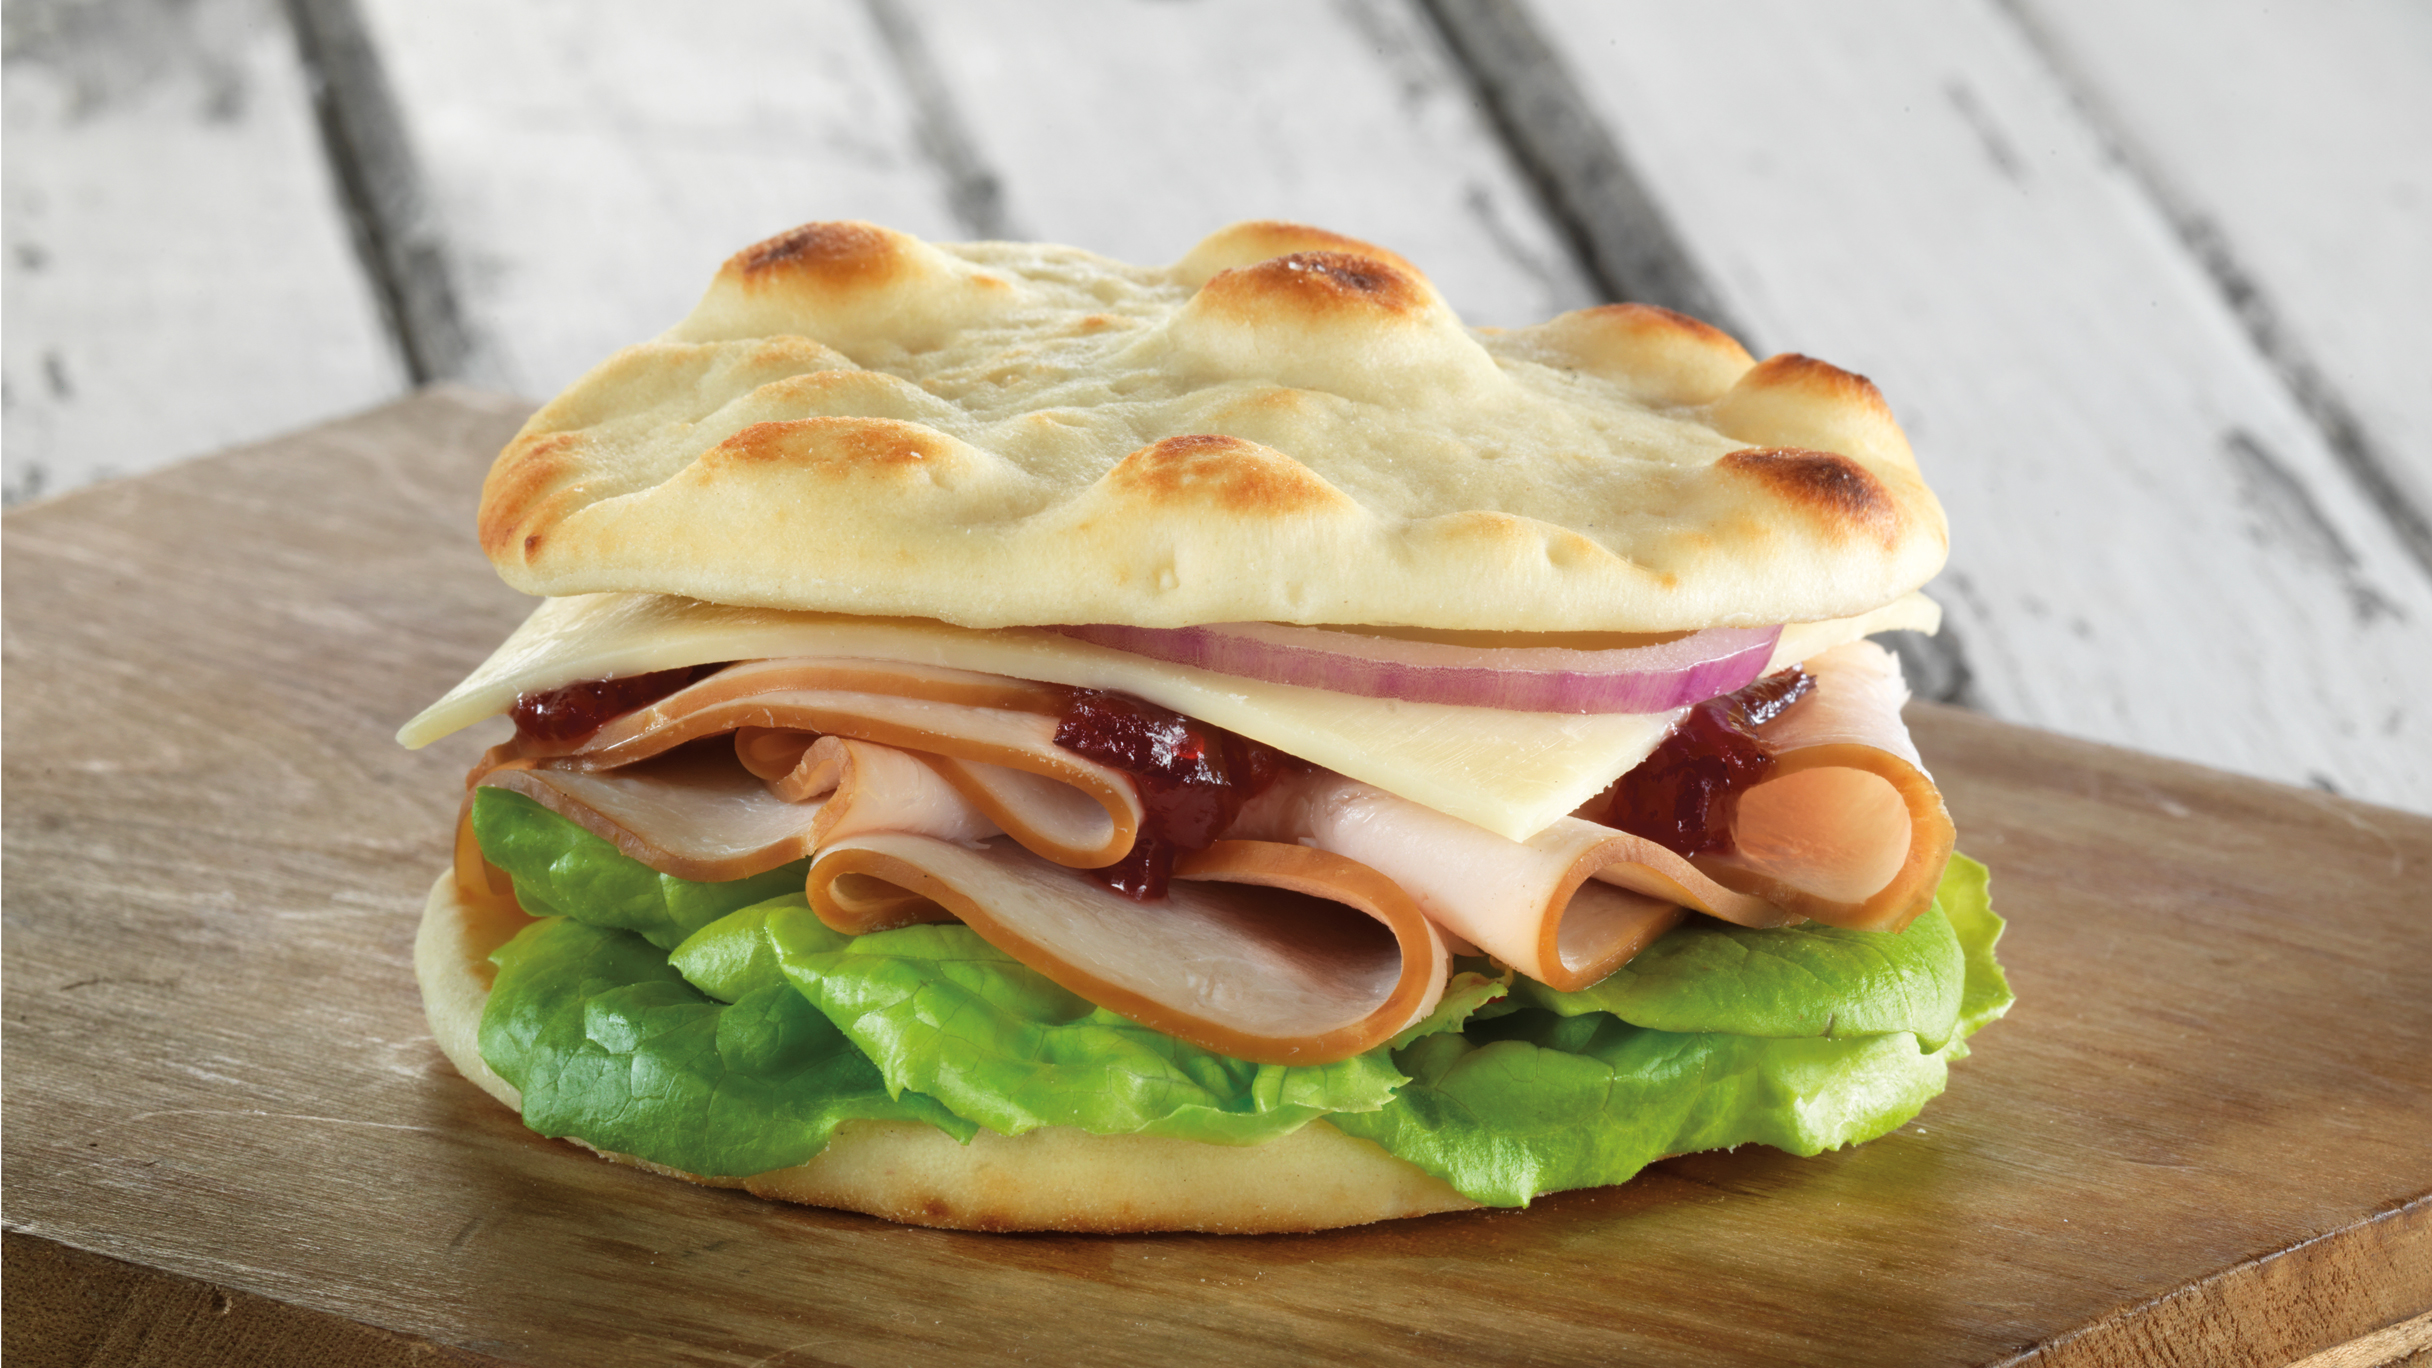 An easy and quick turkey, cranberry cheese and onion sandwich made with Stonefire Original Naan Rounds